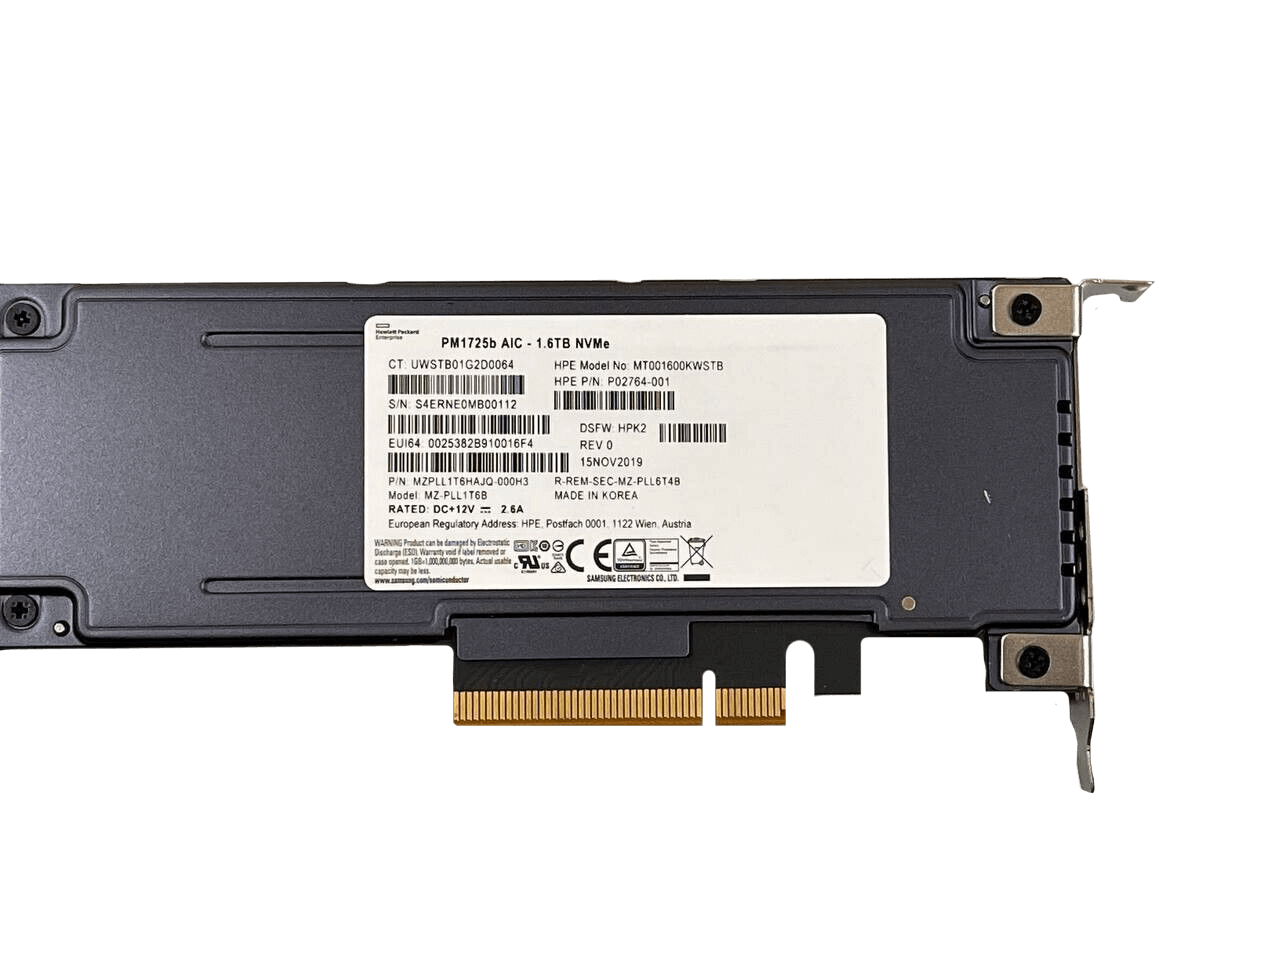 HPE P02764-001 1.6TB PCIe NVMe AIC HHHL Mixed Use AIC TLC SSD Solid State Drive